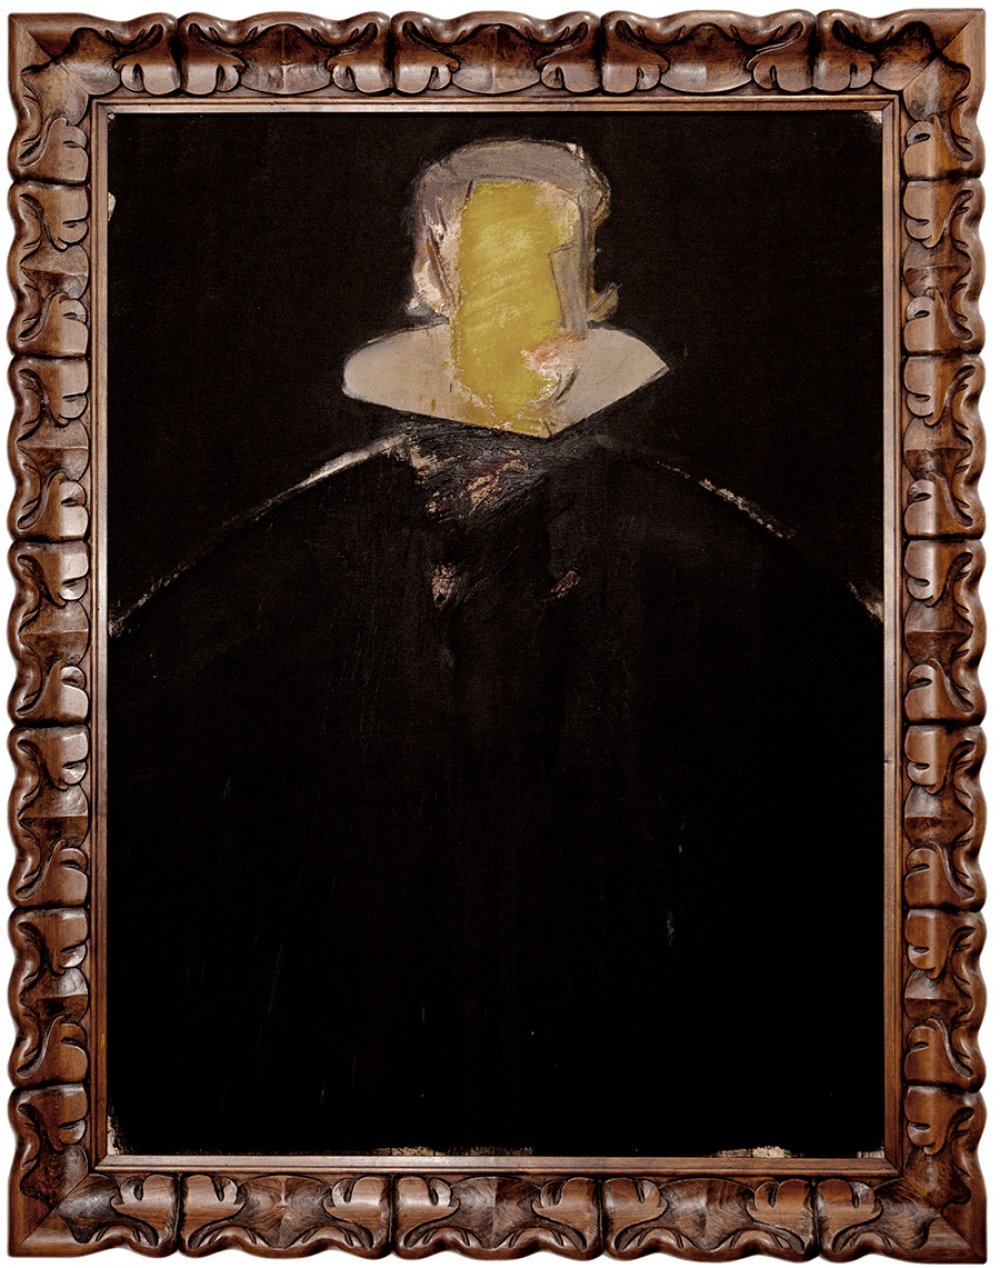 MANOLO VALDÉS BLASCO (Valencia, 1942)"Felipe IV", 1982Oil on canvas adhered to board.Signed on the - Image 5 of 5